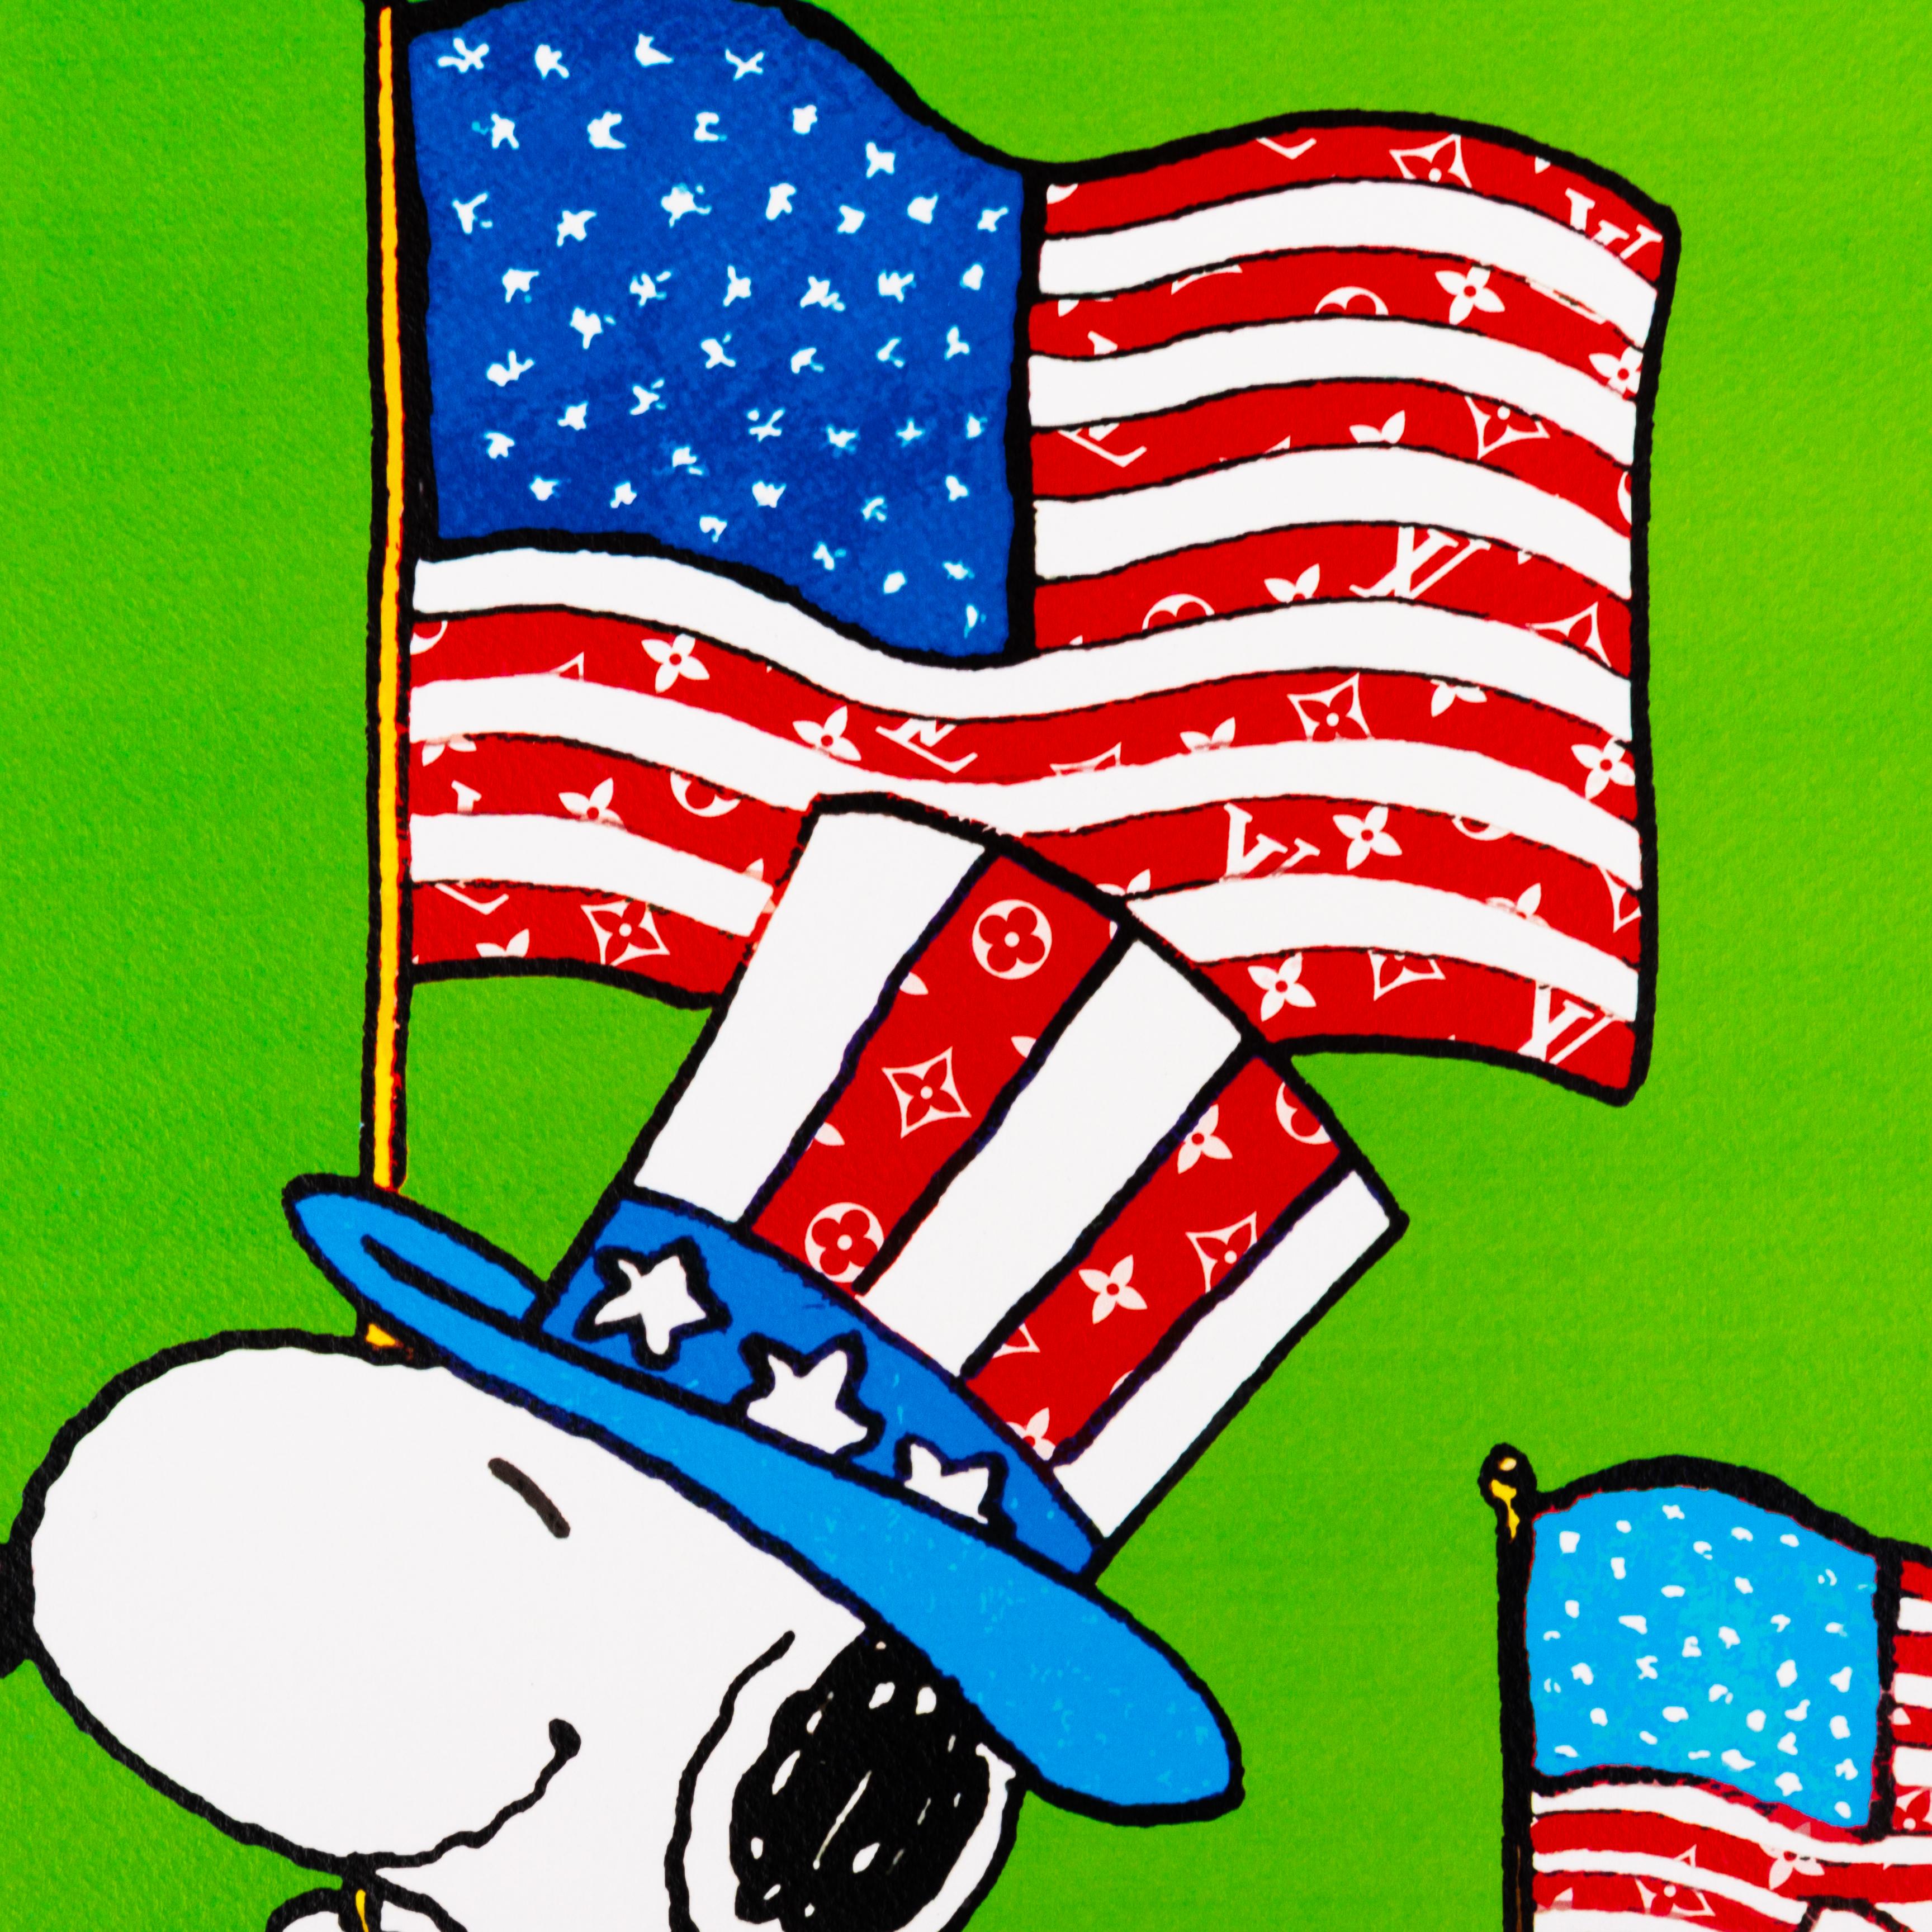 Death NYC Signed Limited Ed Pop Art Print Snoopy America
From a private English collection
Free international shipping

